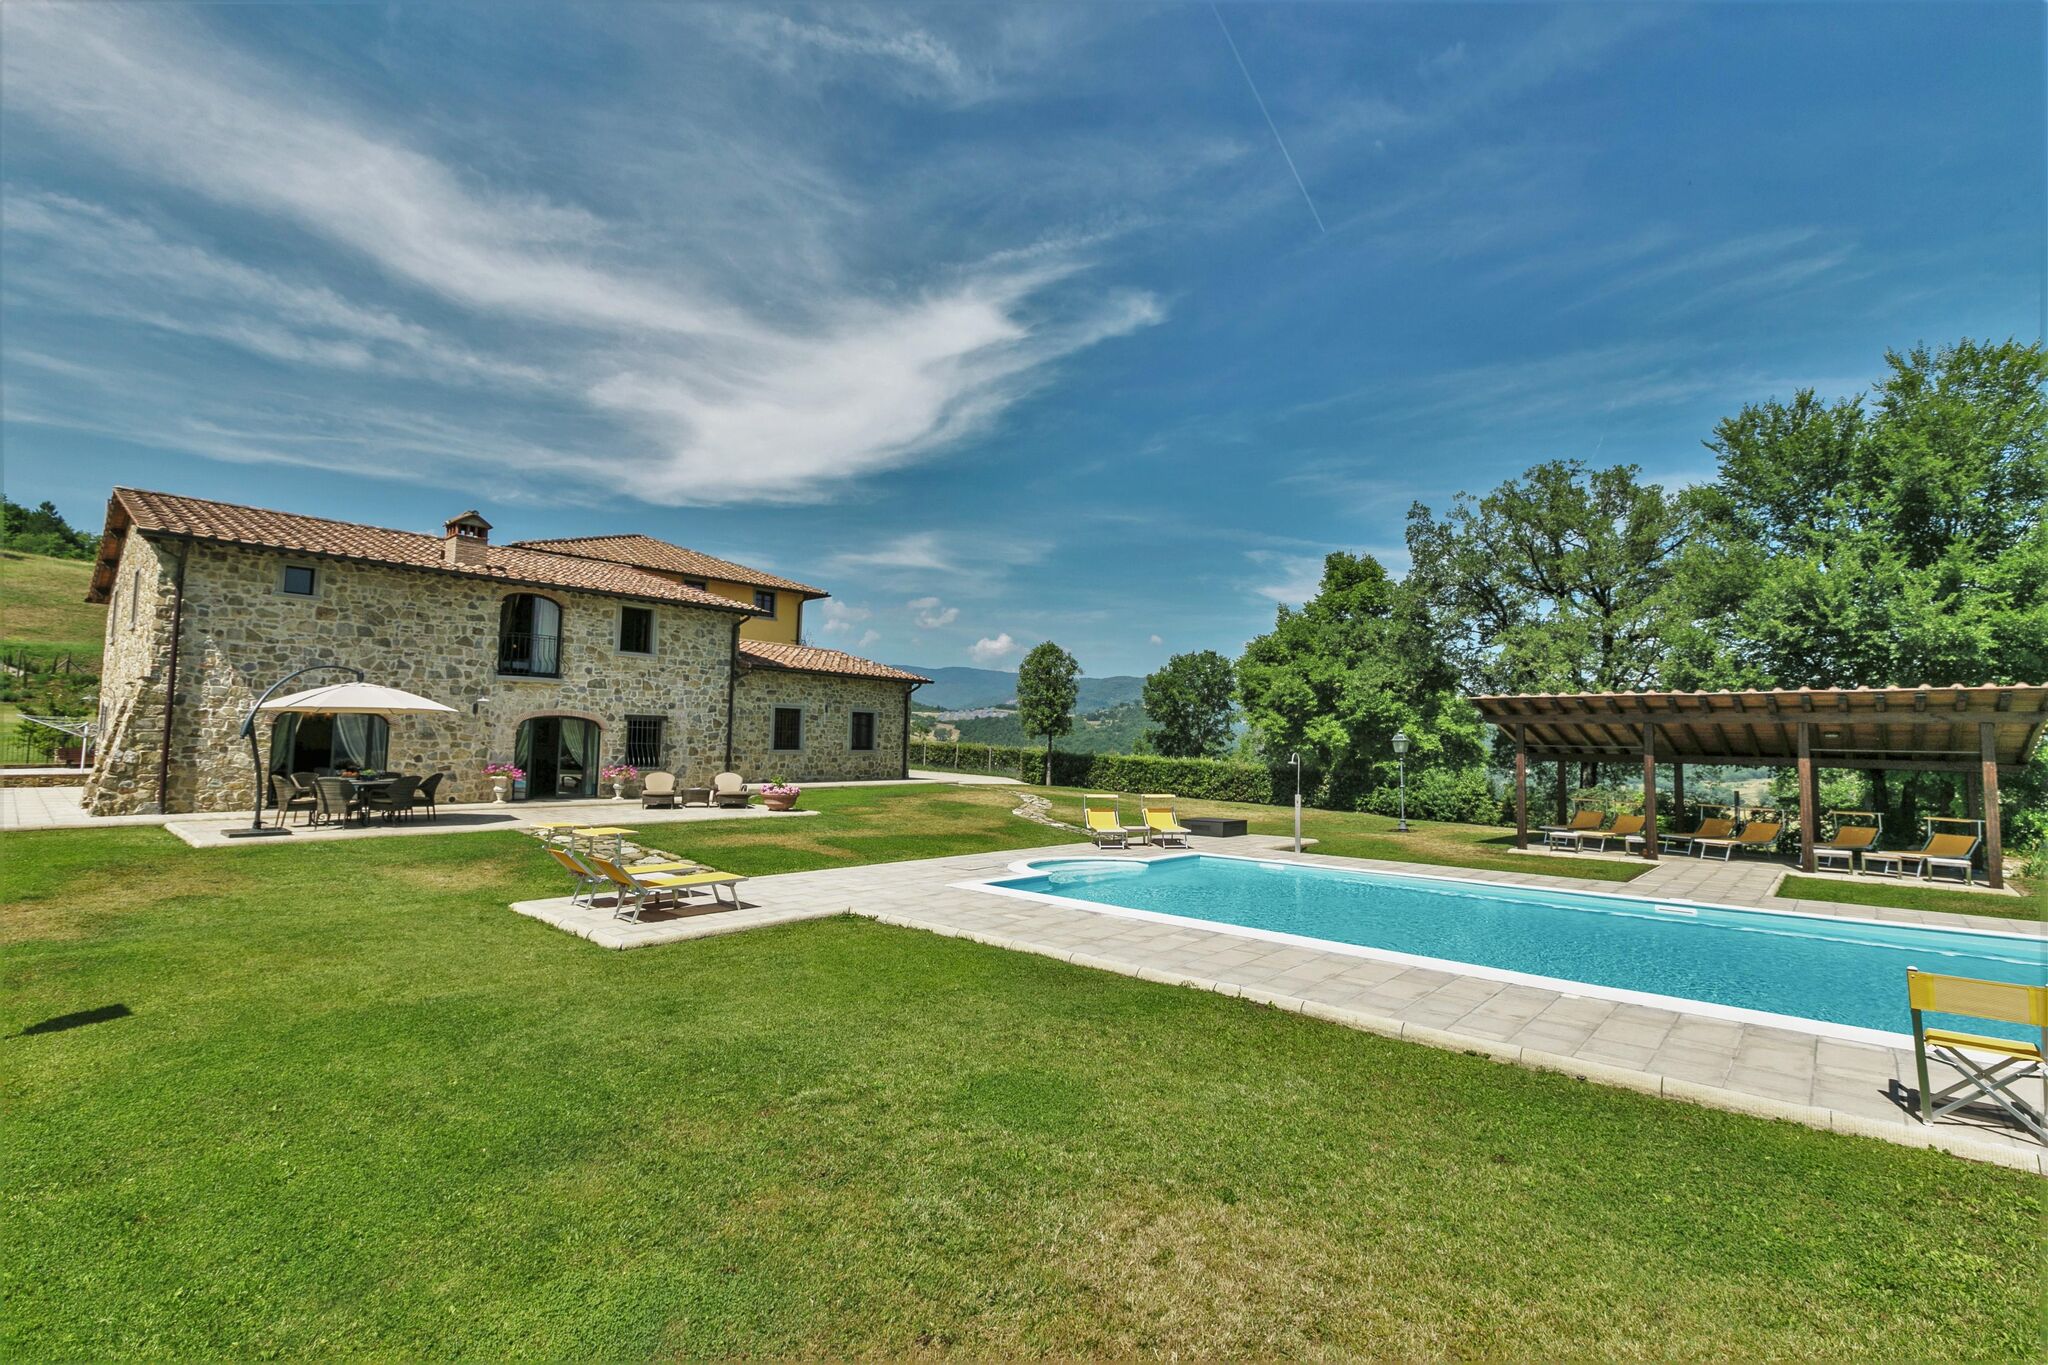 Luxury villa with pool and beautiful garden on an estate